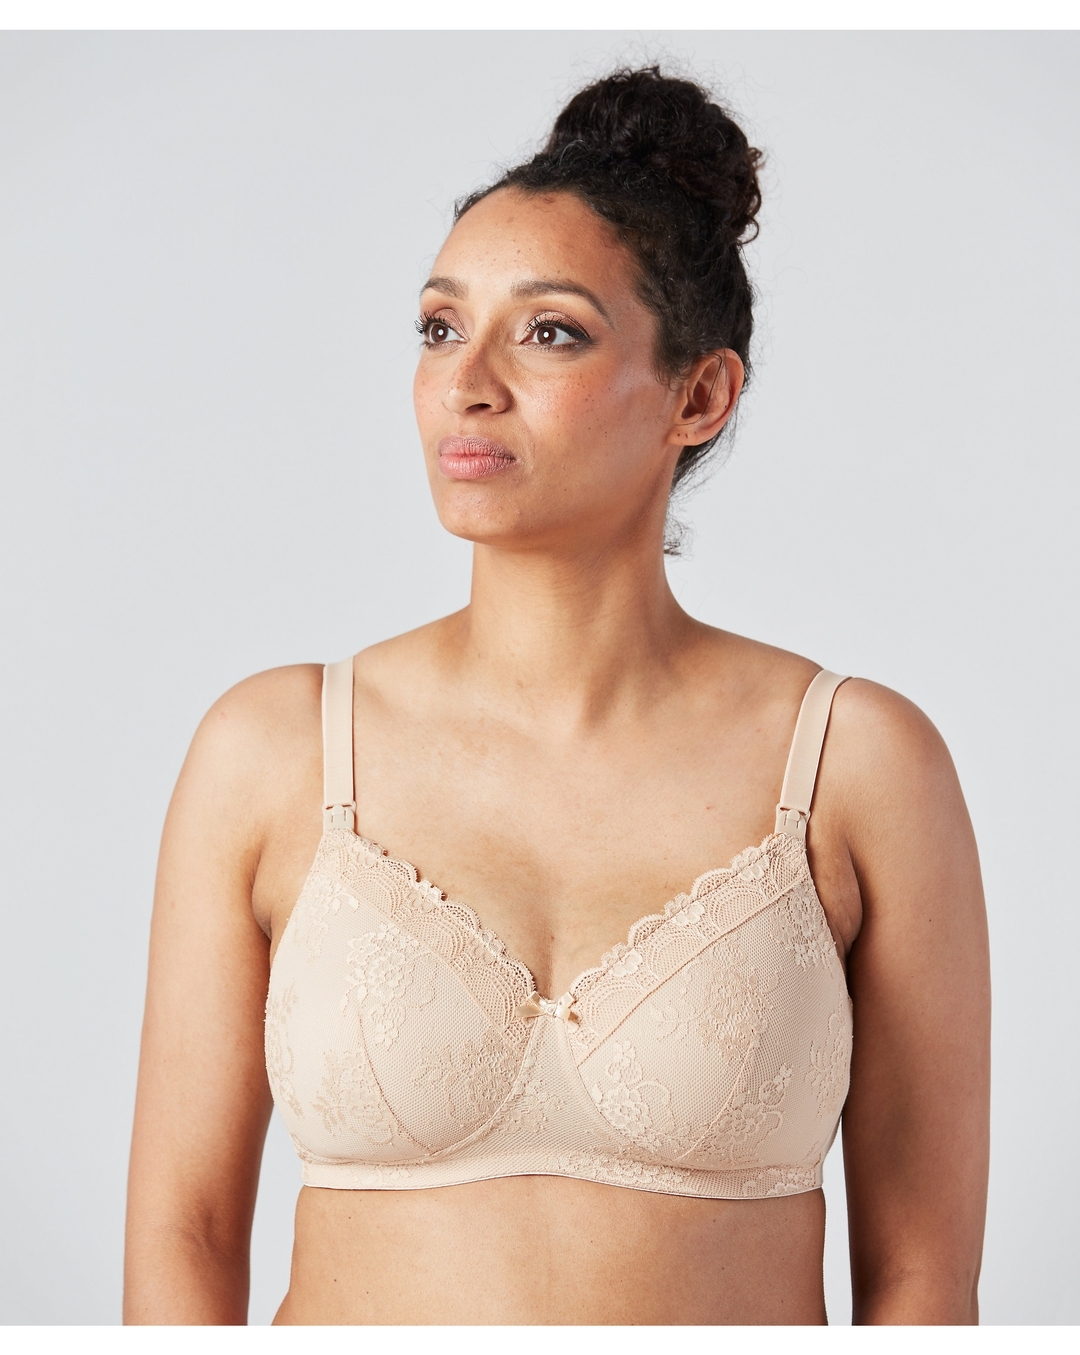 Mothercare 34G Size Bra in Mumbai - Dealers, Manufacturers & Suppliers -  Justdial